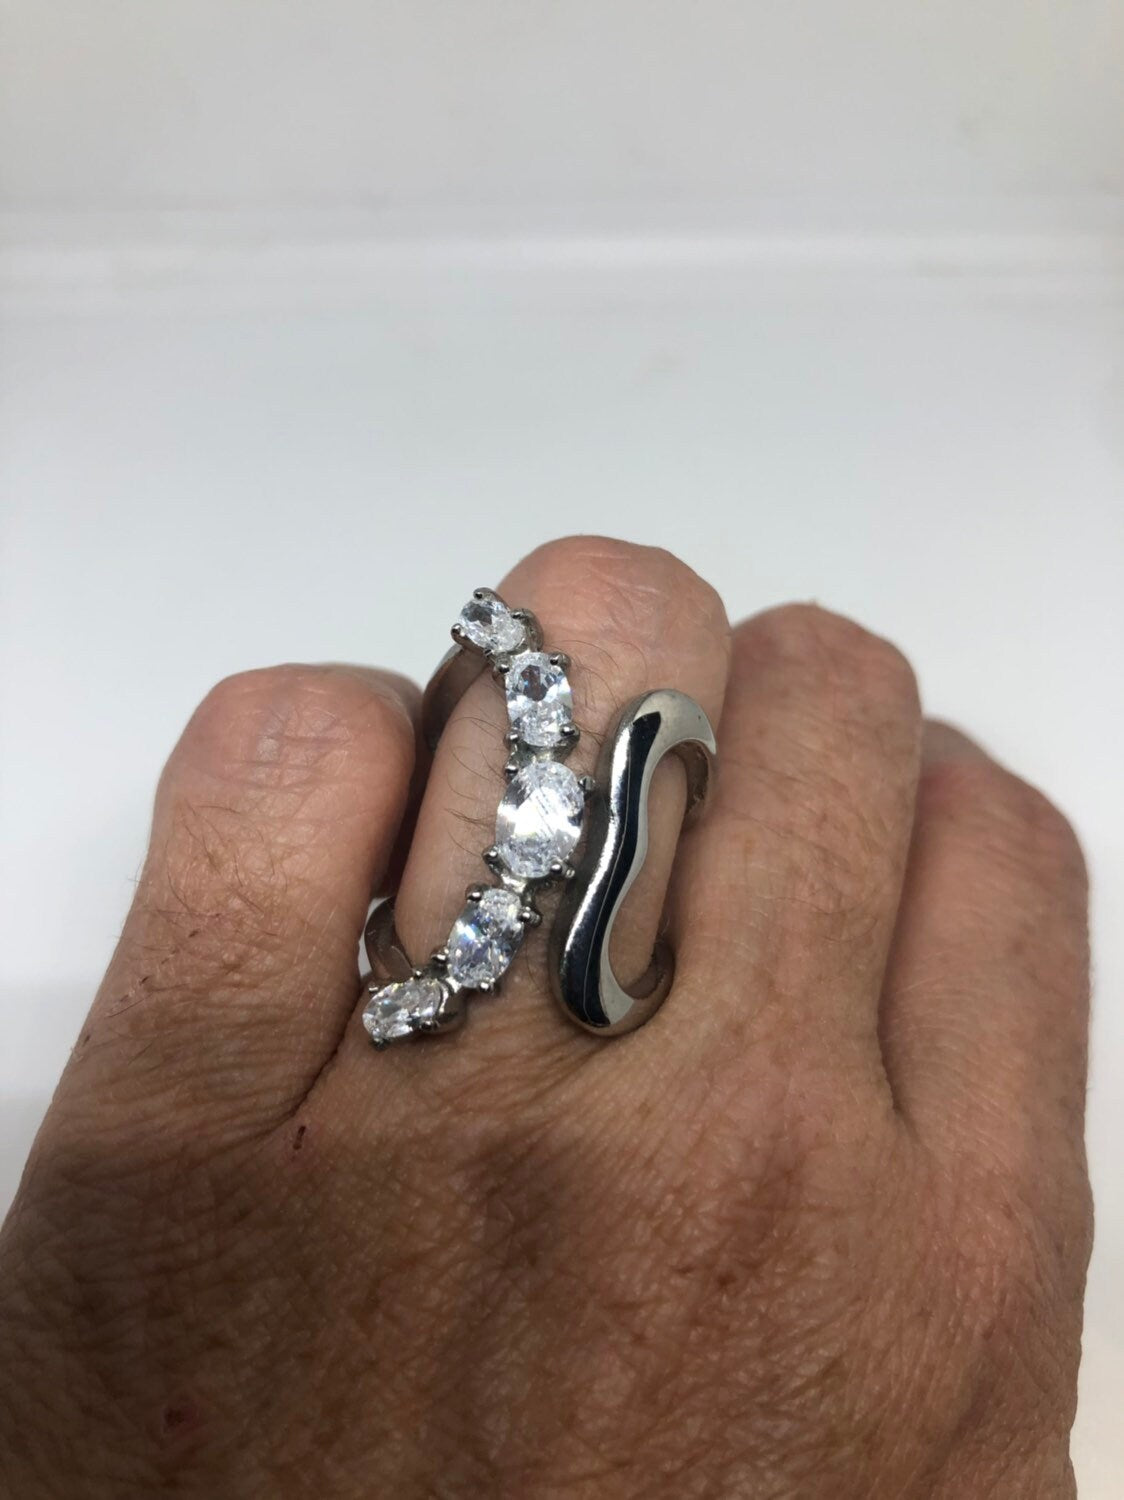 Vintage Zirconia Crystal Stainless Steel Band Ring